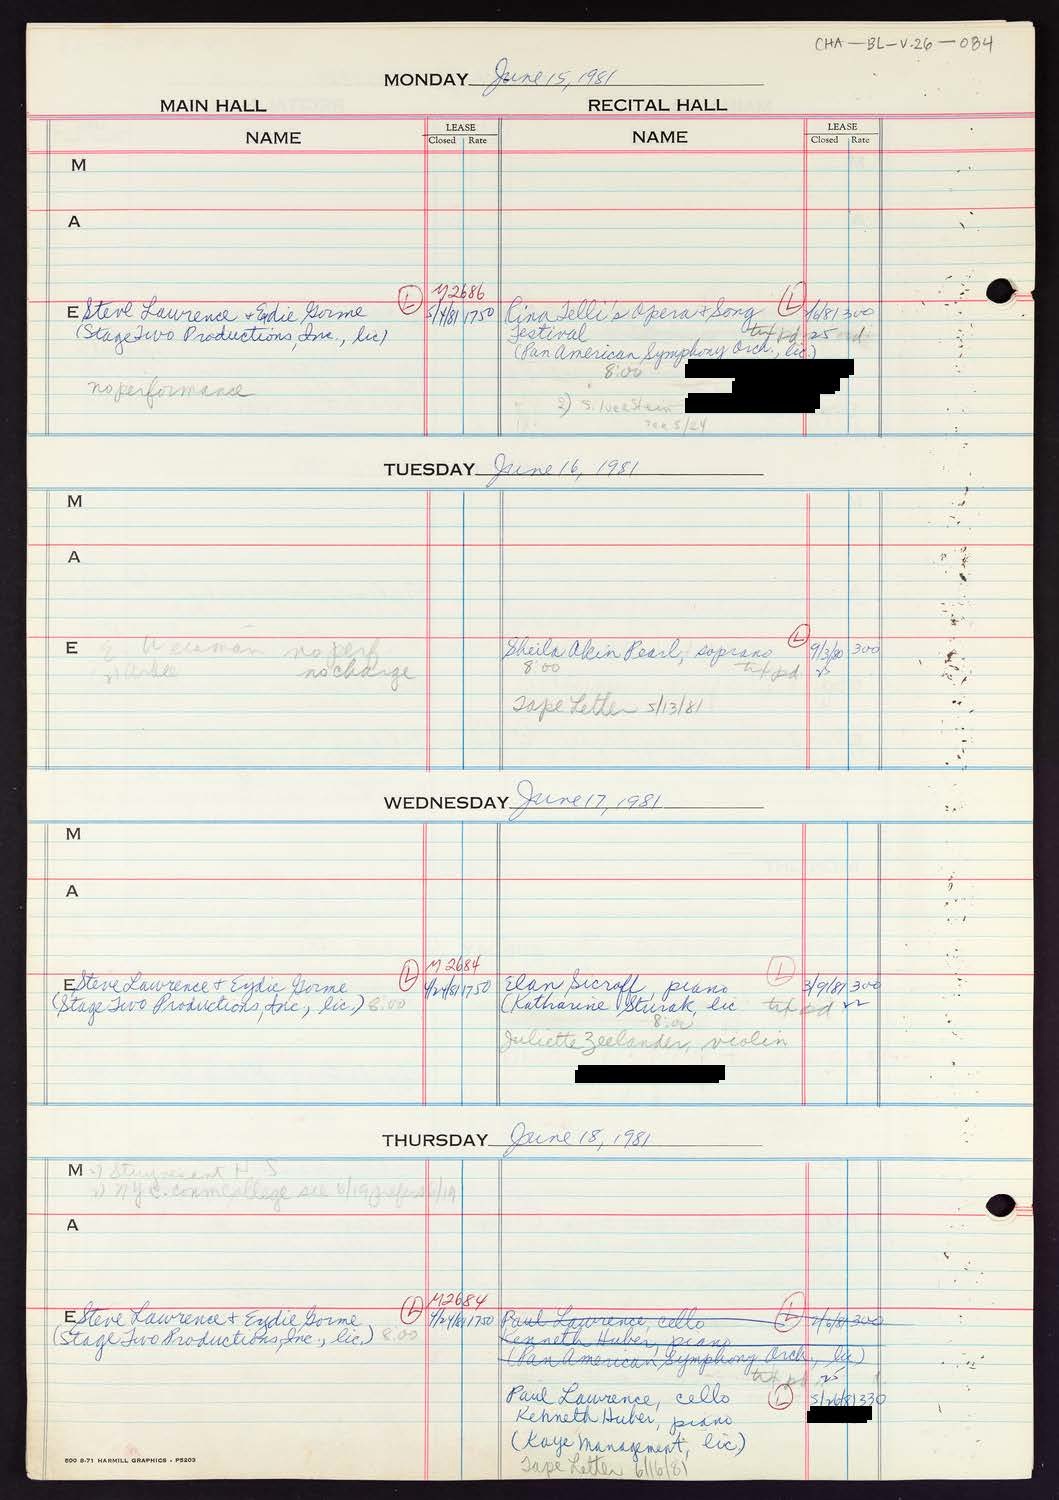 Carnegie Hall Booking Ledger, volume 26, page 84